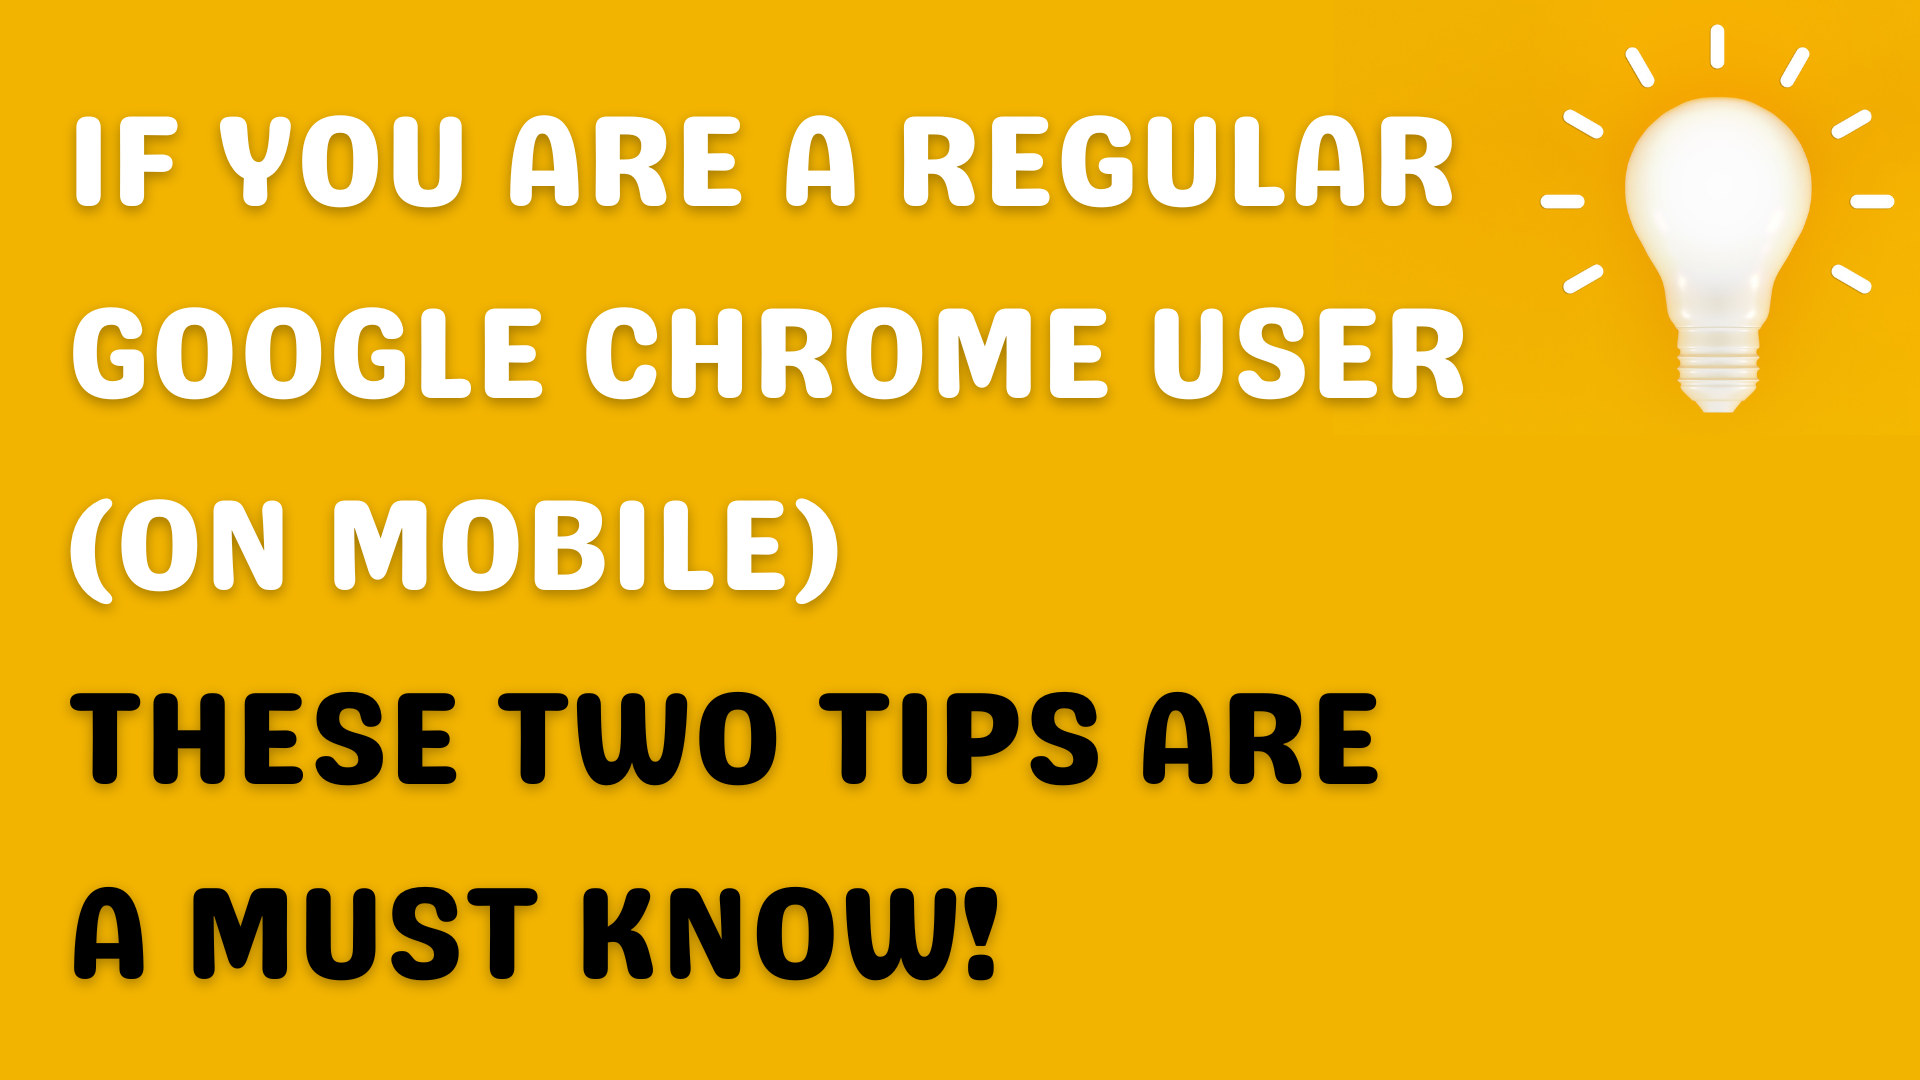 If You Are A Regular Google Chrome User (On Mobile) These Two Tips Are A Must Know!